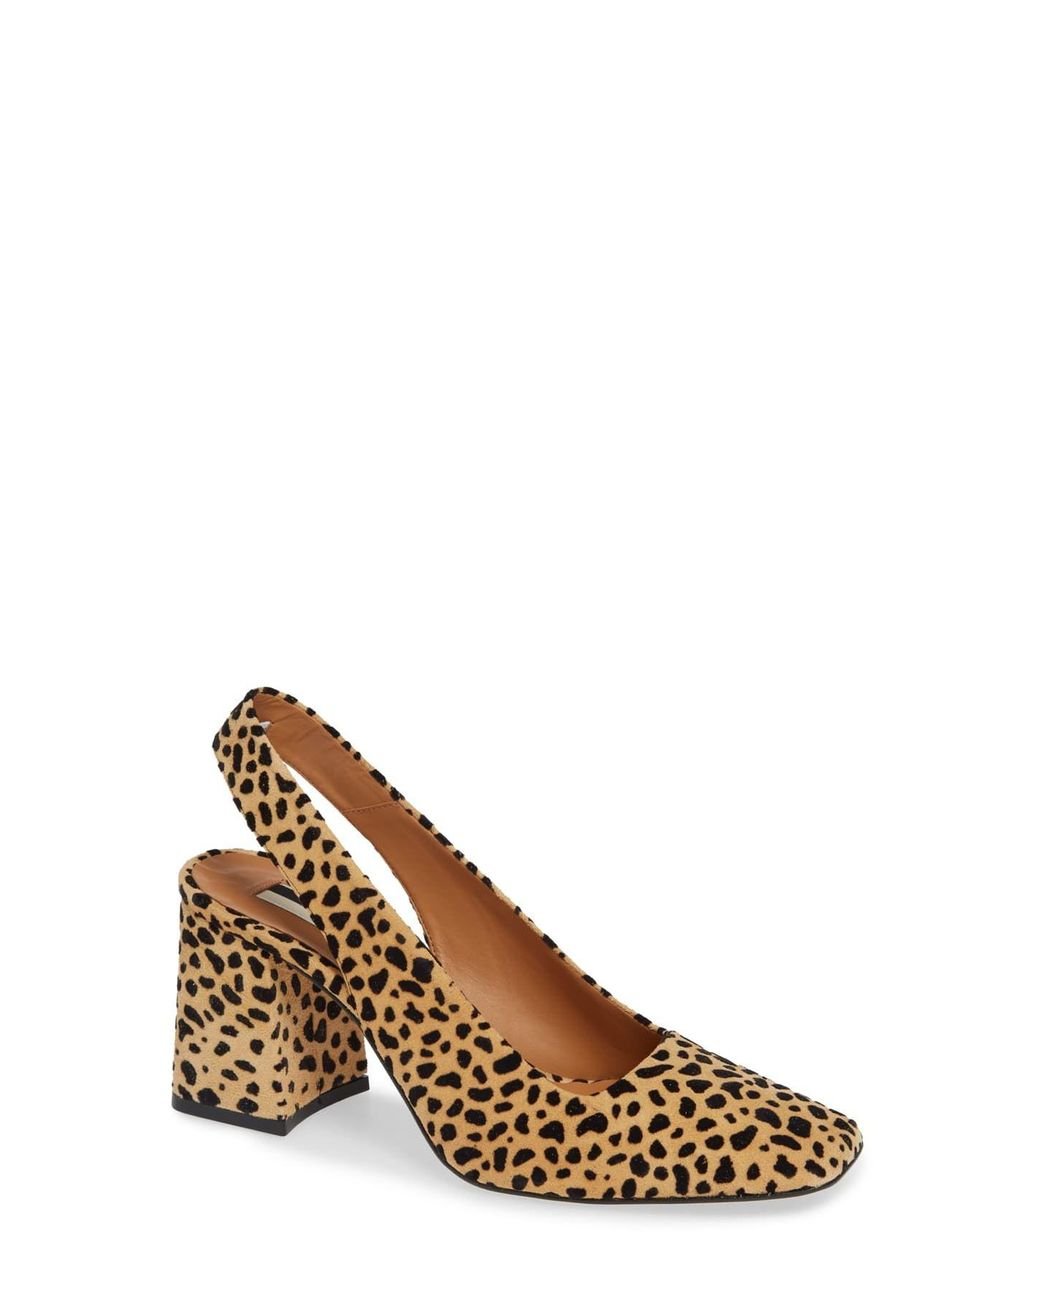 TOPSHOP Gainor Leopard Print Slingback Shoes in Brown | Lyst